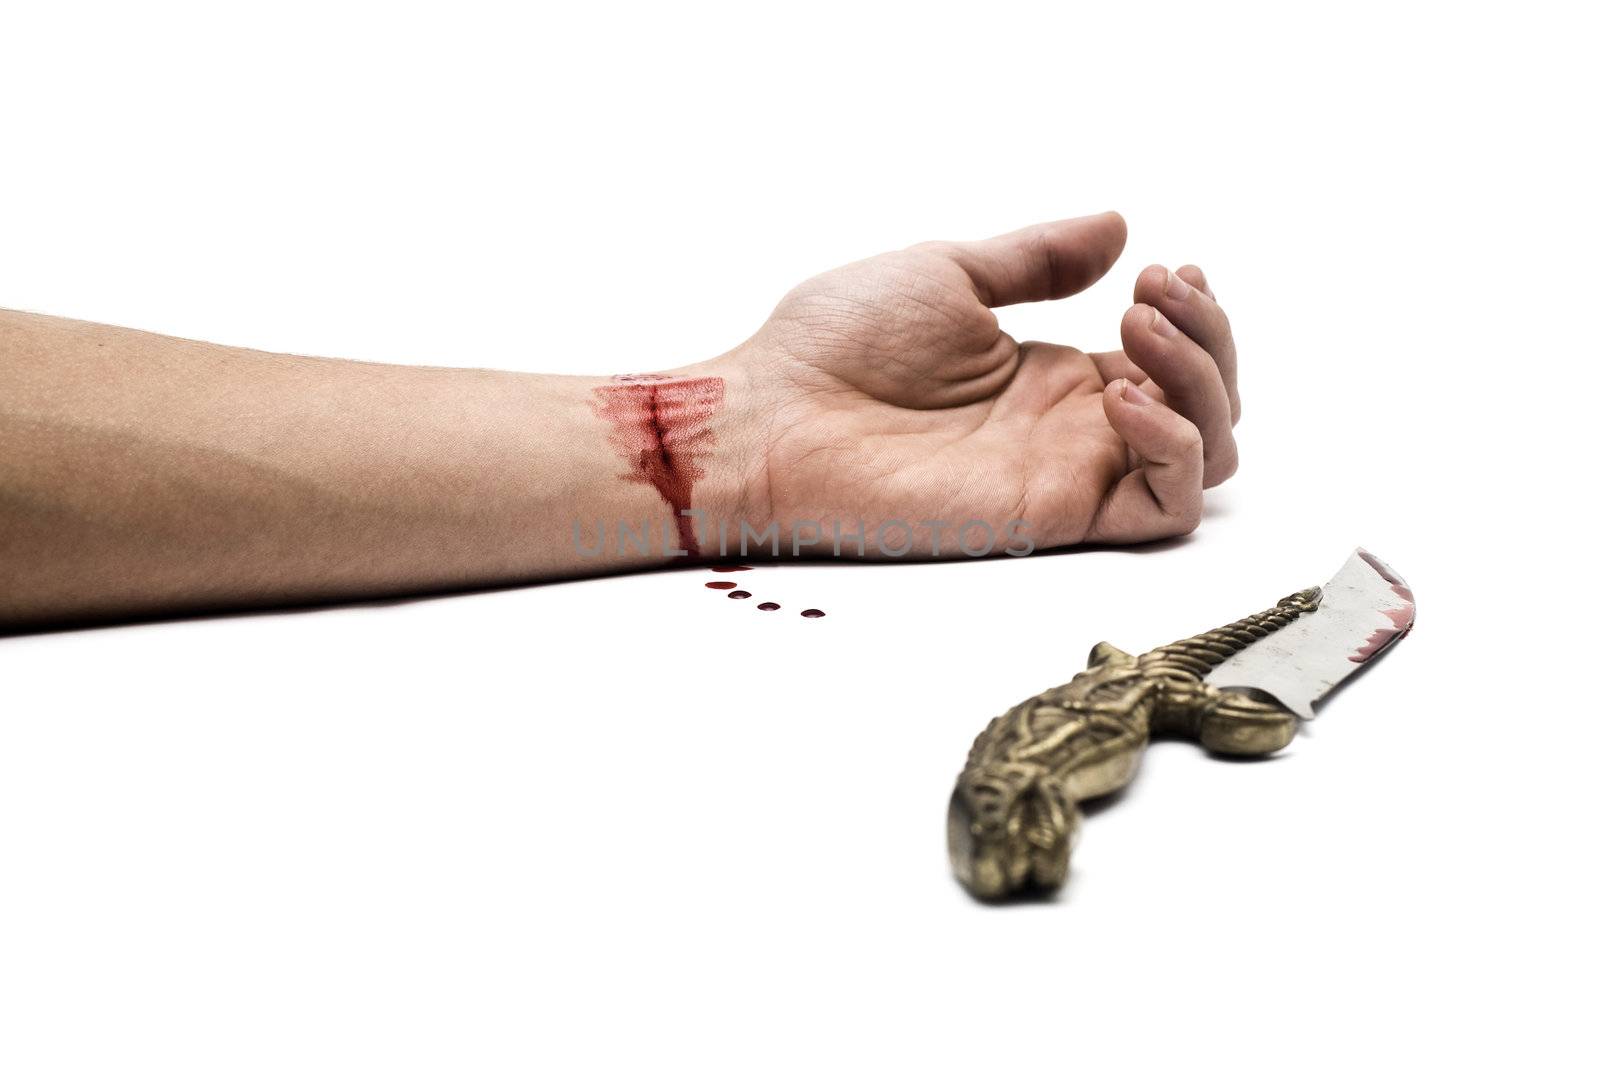 A bloody knife and a cut wrist, isolated on white. This image has innumerous uses like accidents, domestic violence, suicide, murder, hate, etc...
